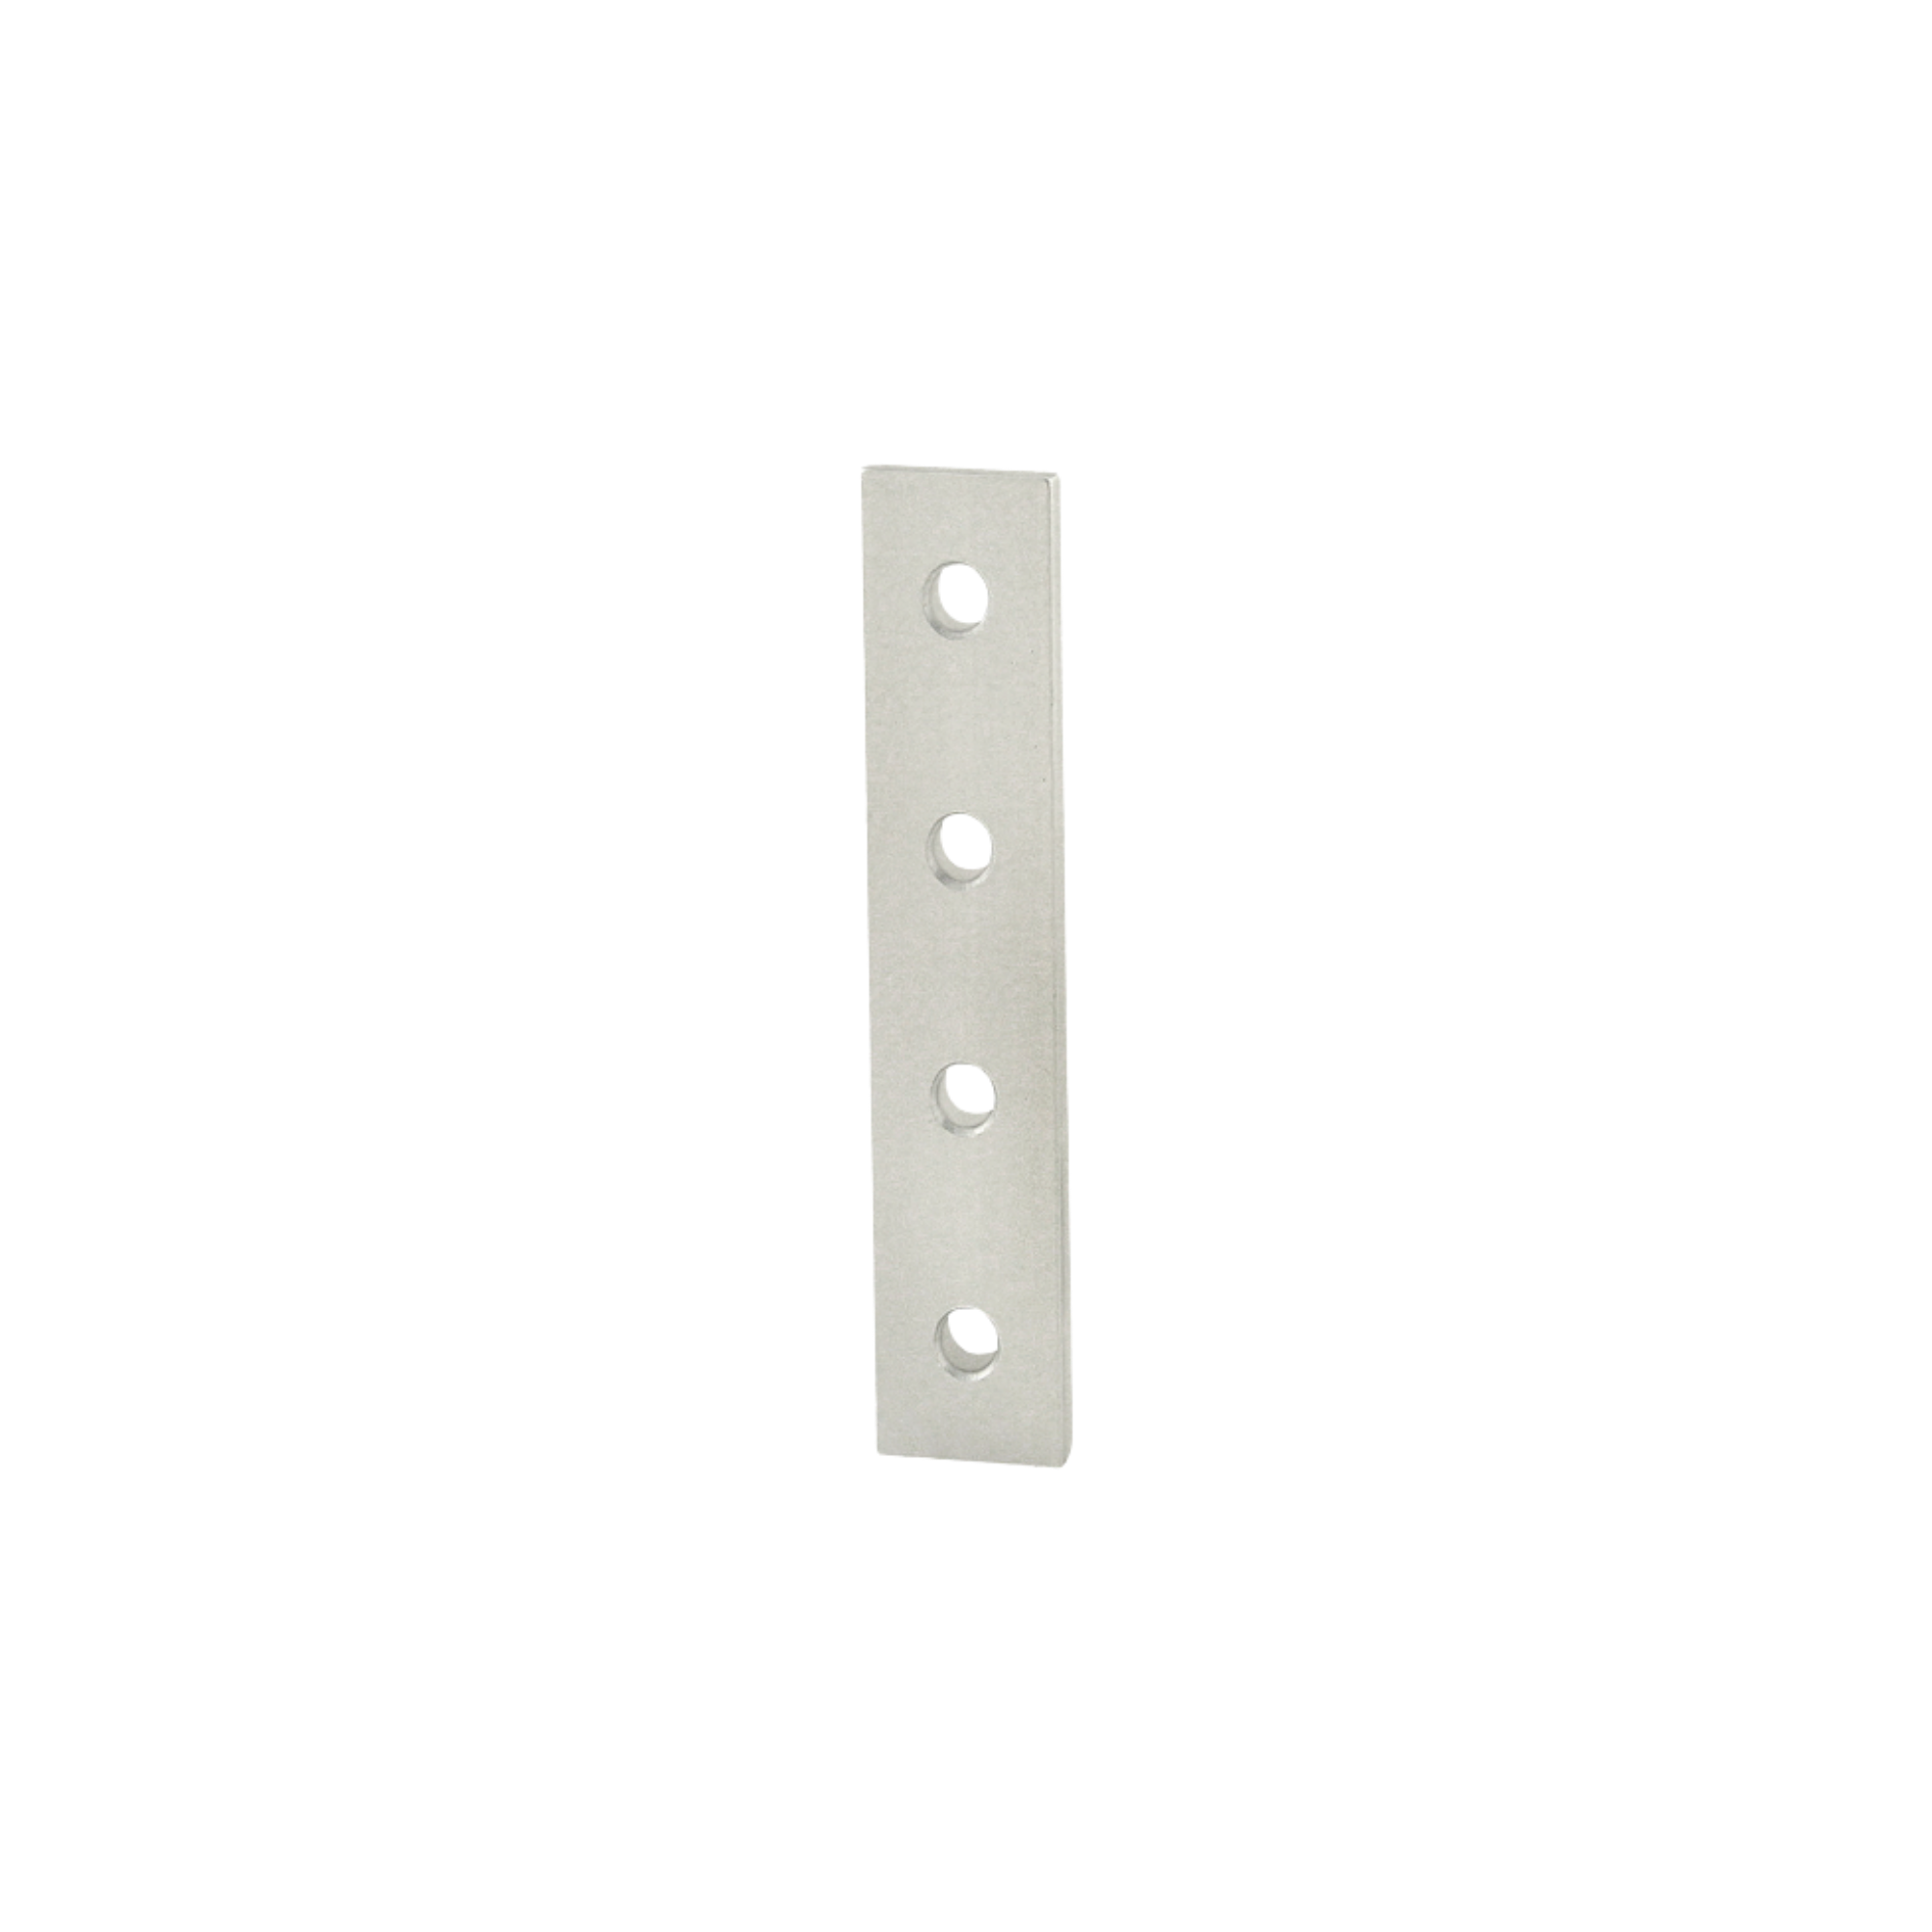 upright rectangle flat joining plate with four vertically lined mounting holes